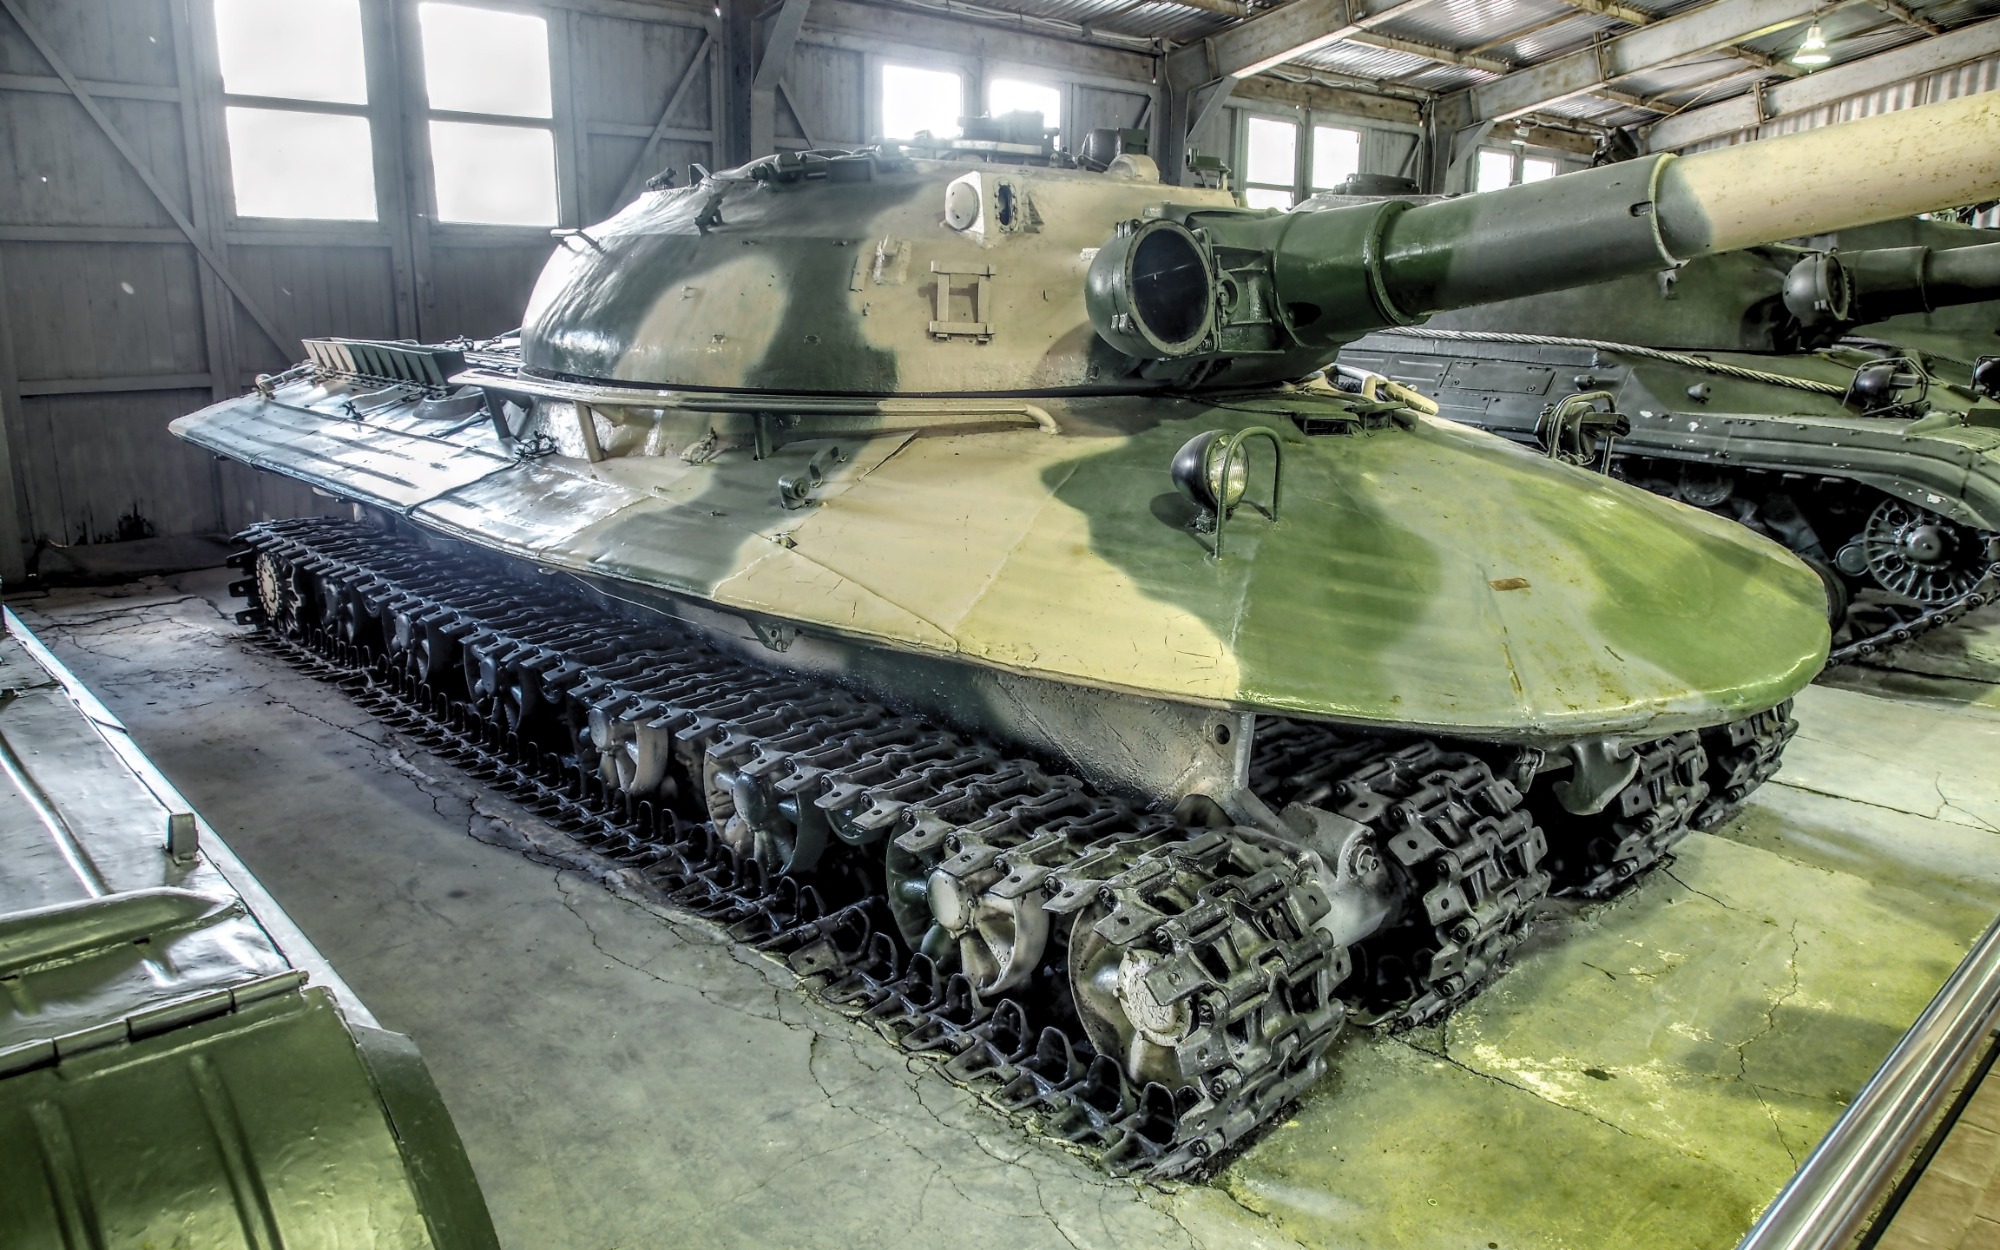 Russia Built This Tank for a Nuclear War With NATO | The National Interest